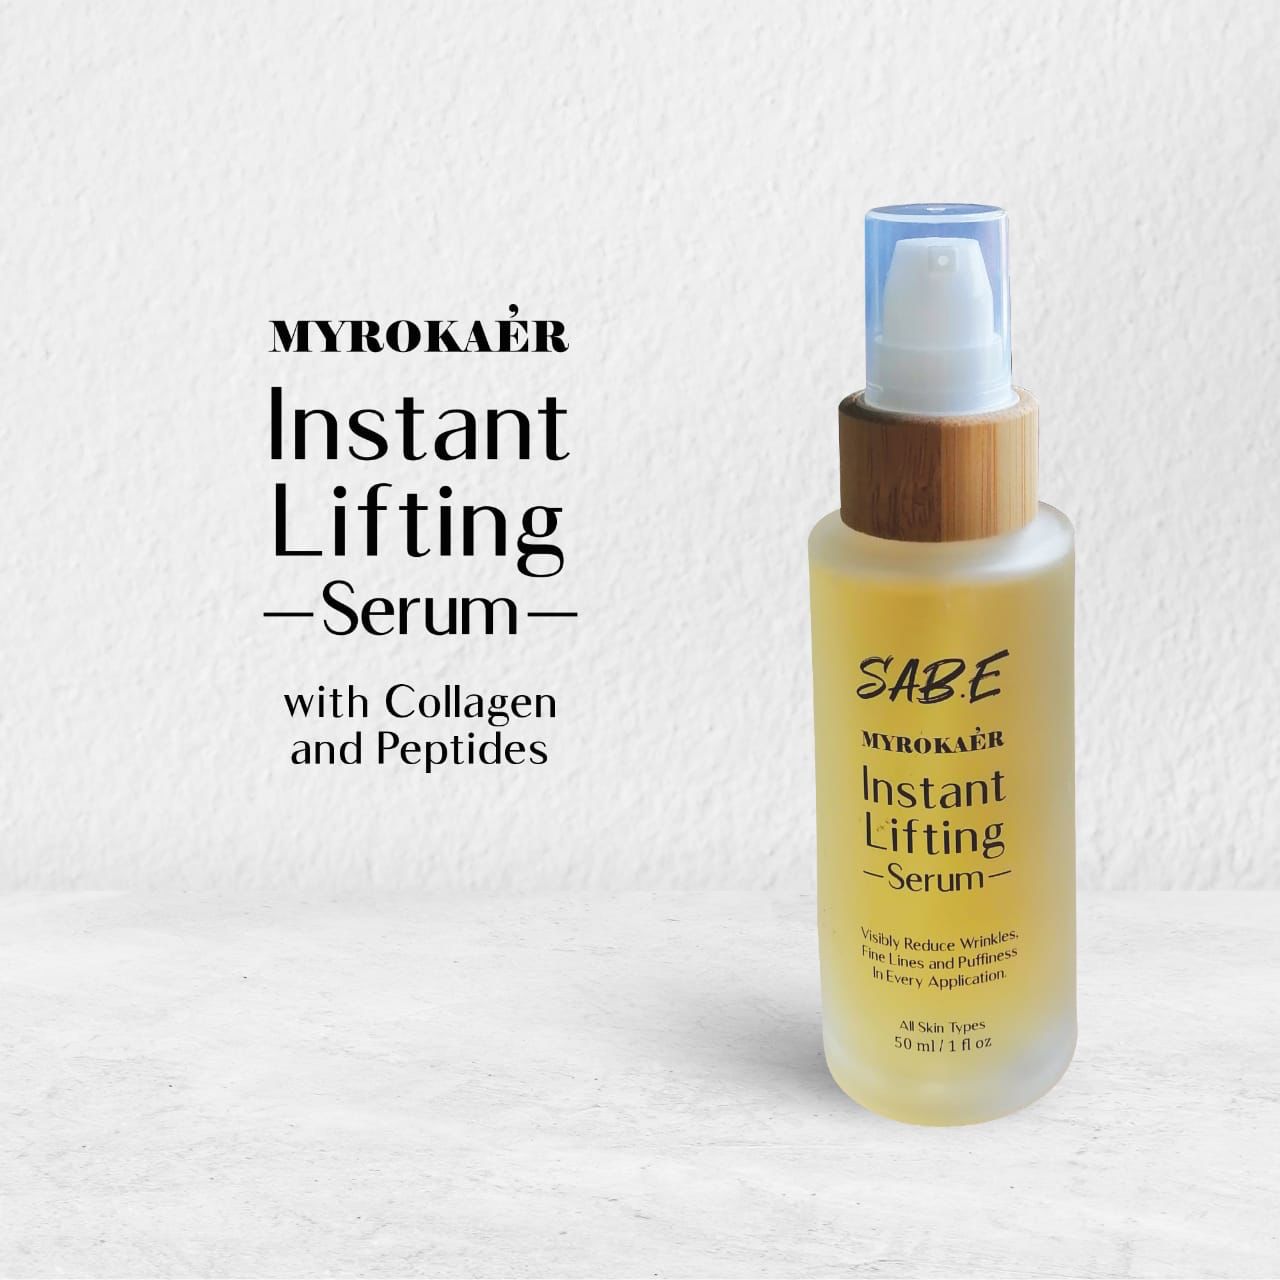 MYROKAÉR Instant Lifting Serum with Collagen and Peptides